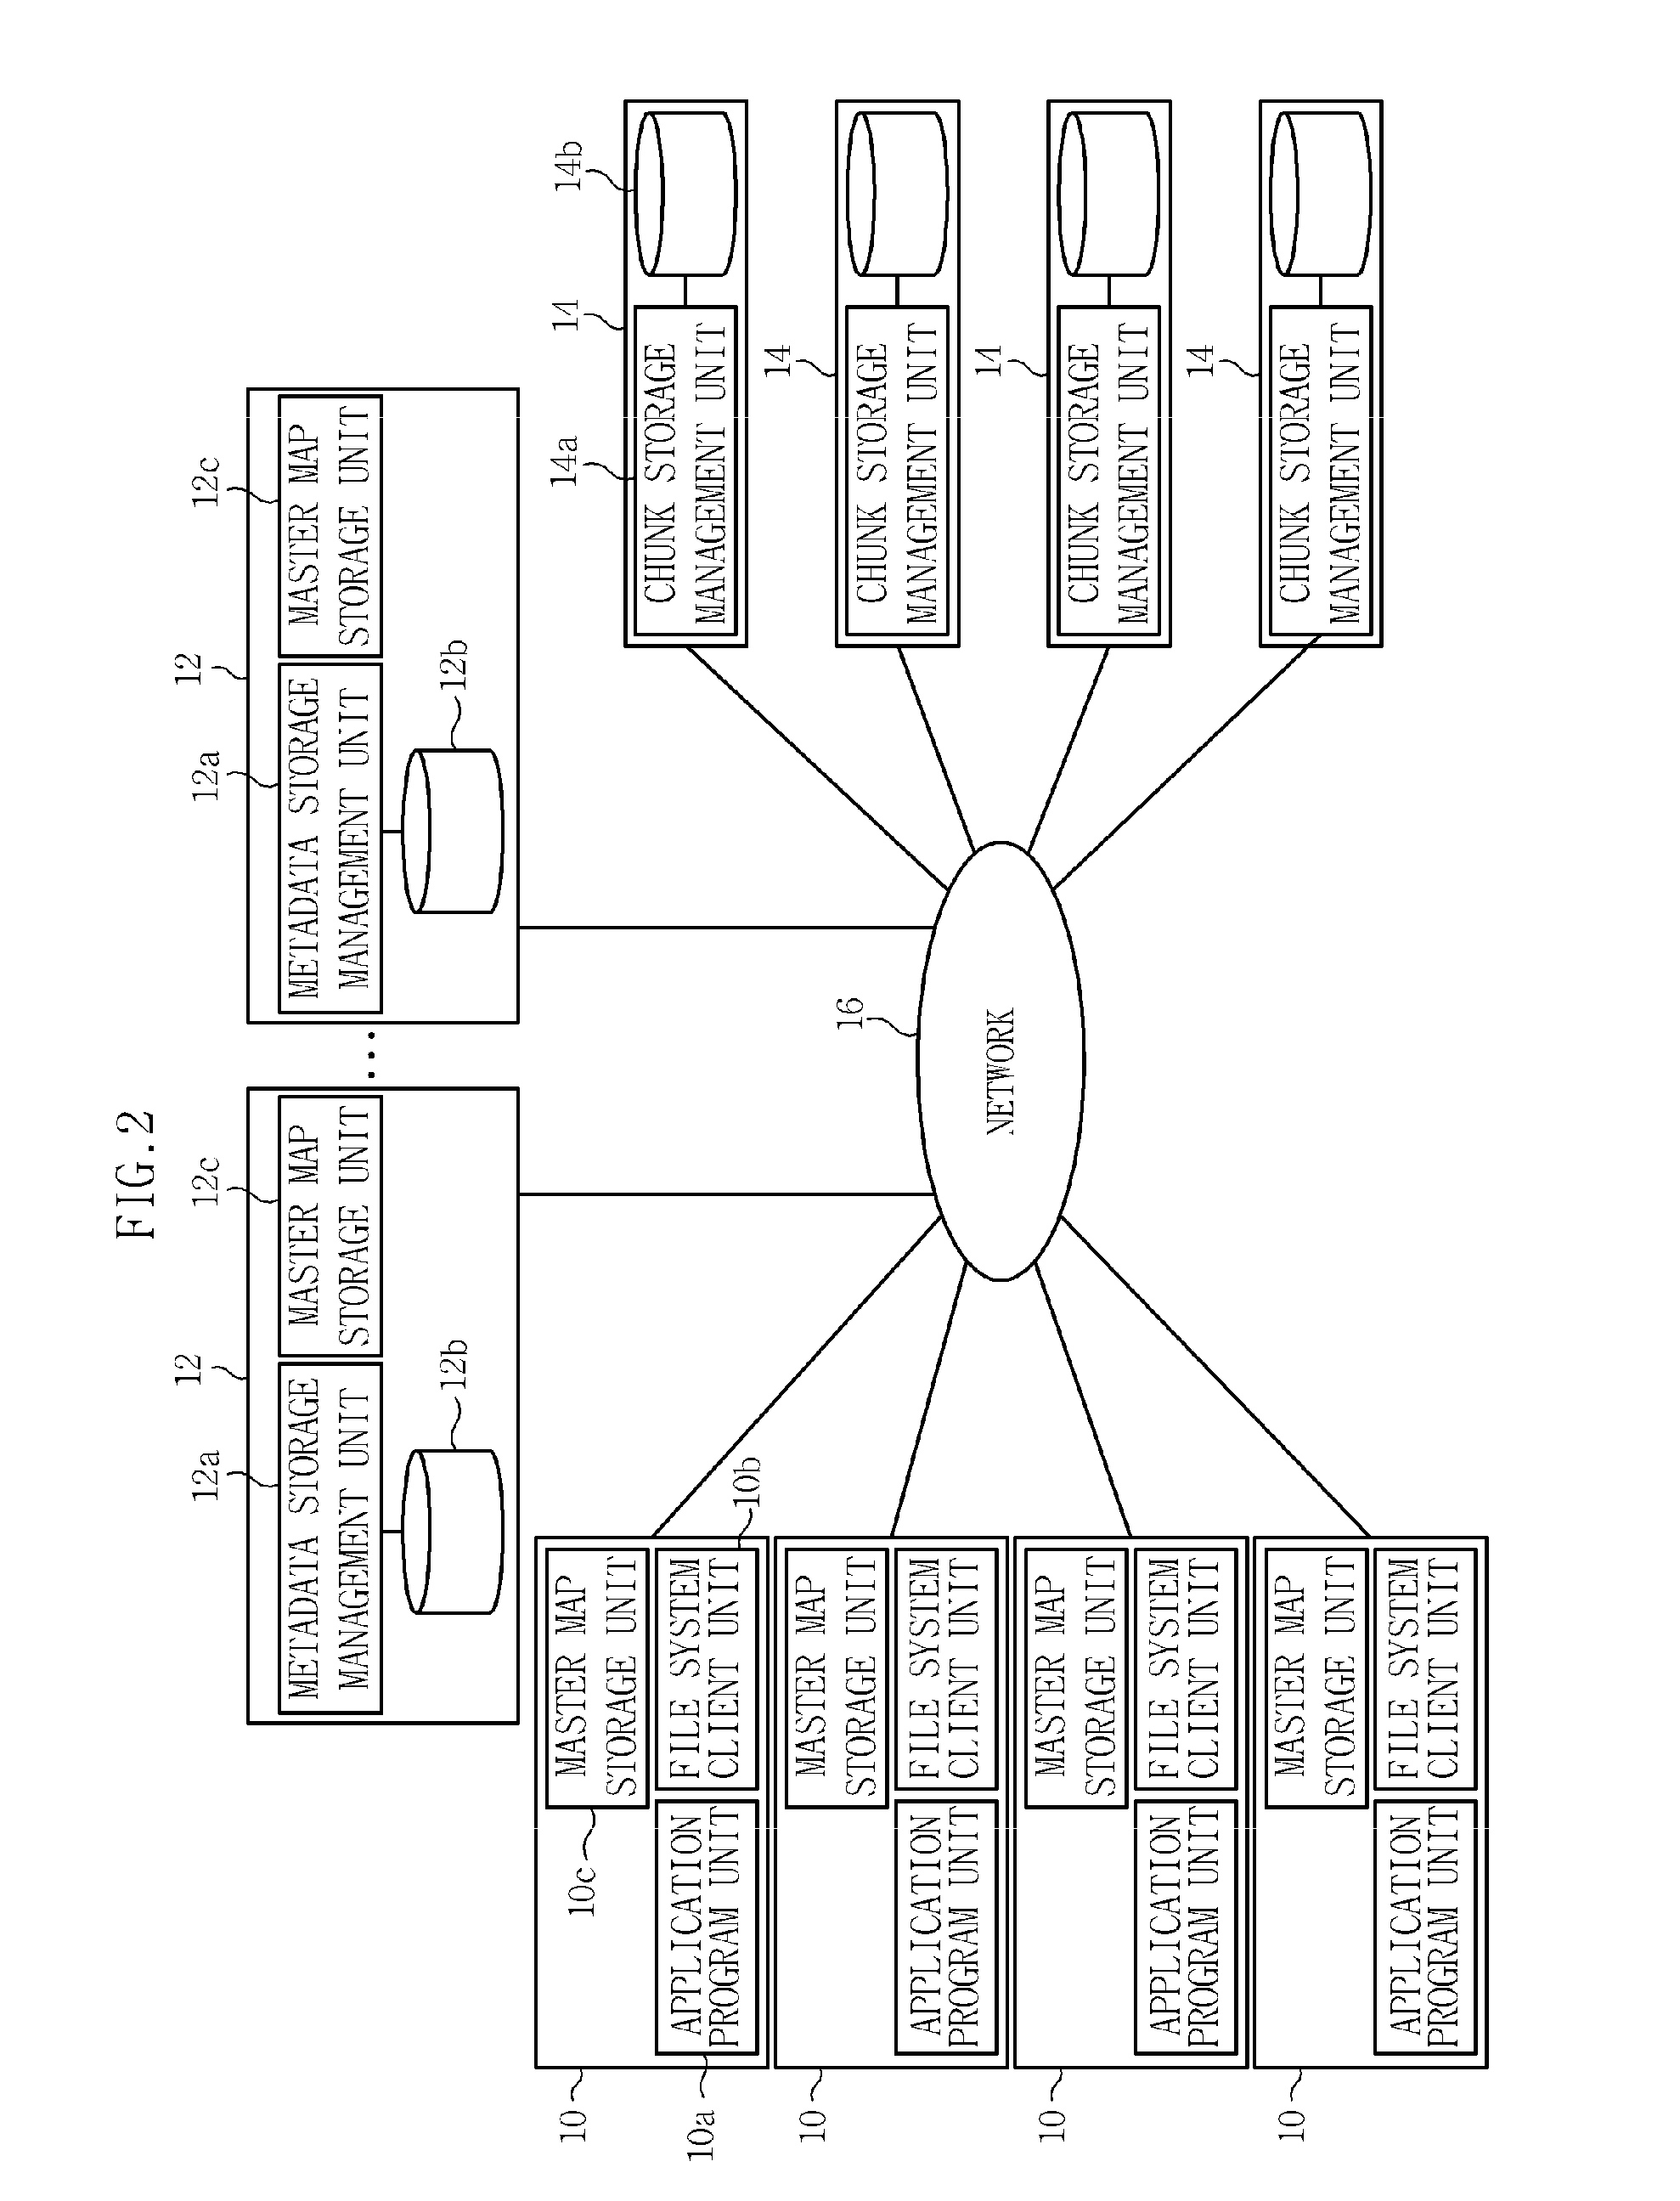 Apparatus and method of managing metadata in asymmetric distributed file system